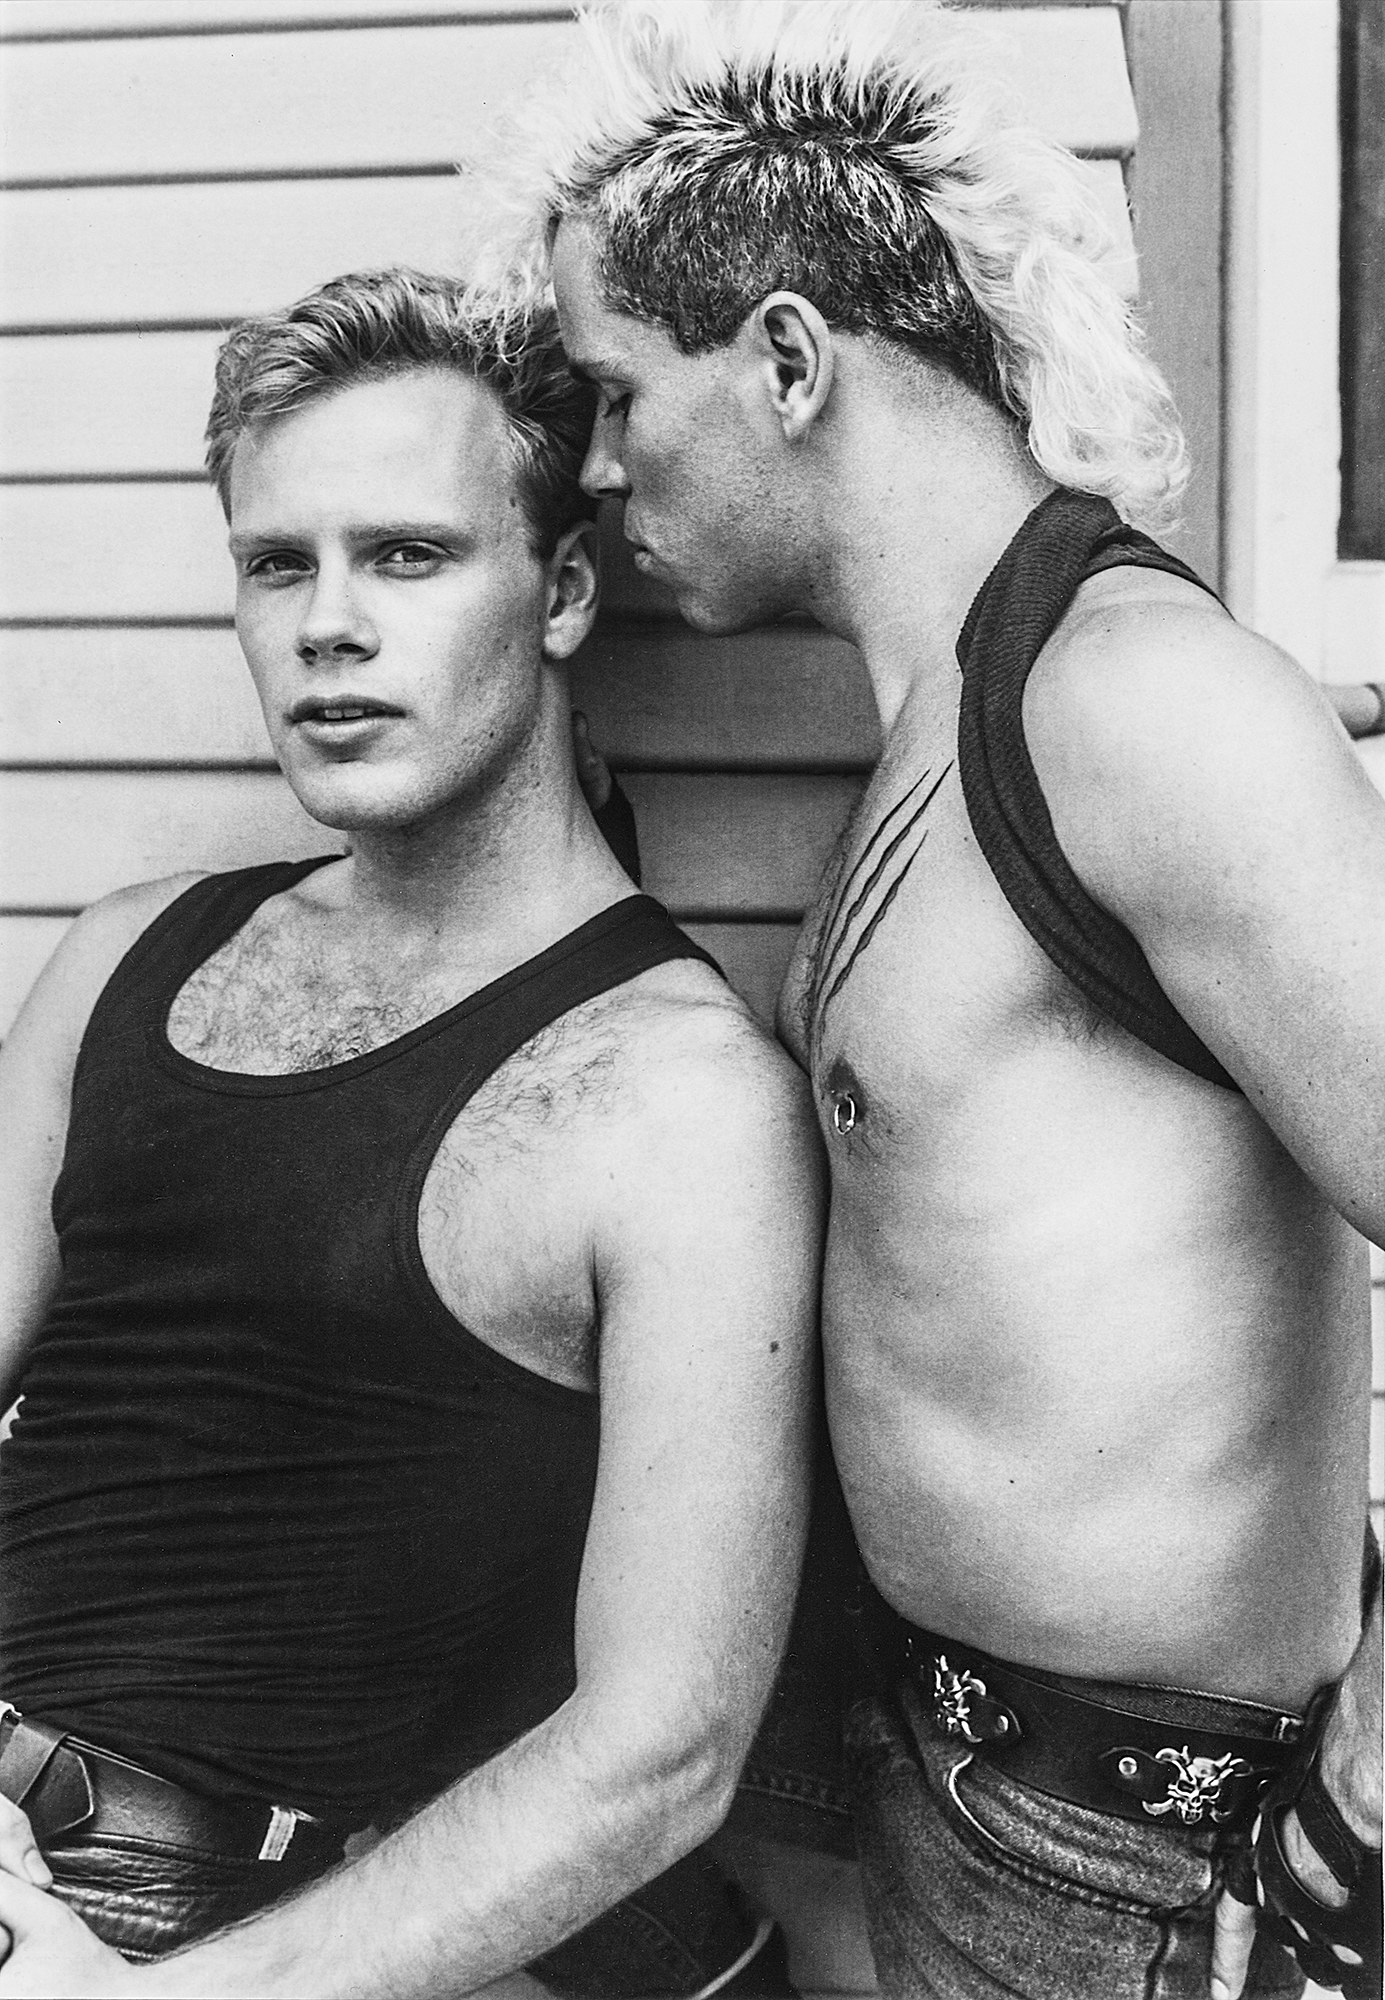 A shirtless man with a mohawk hairdo whispers in the ear of another man